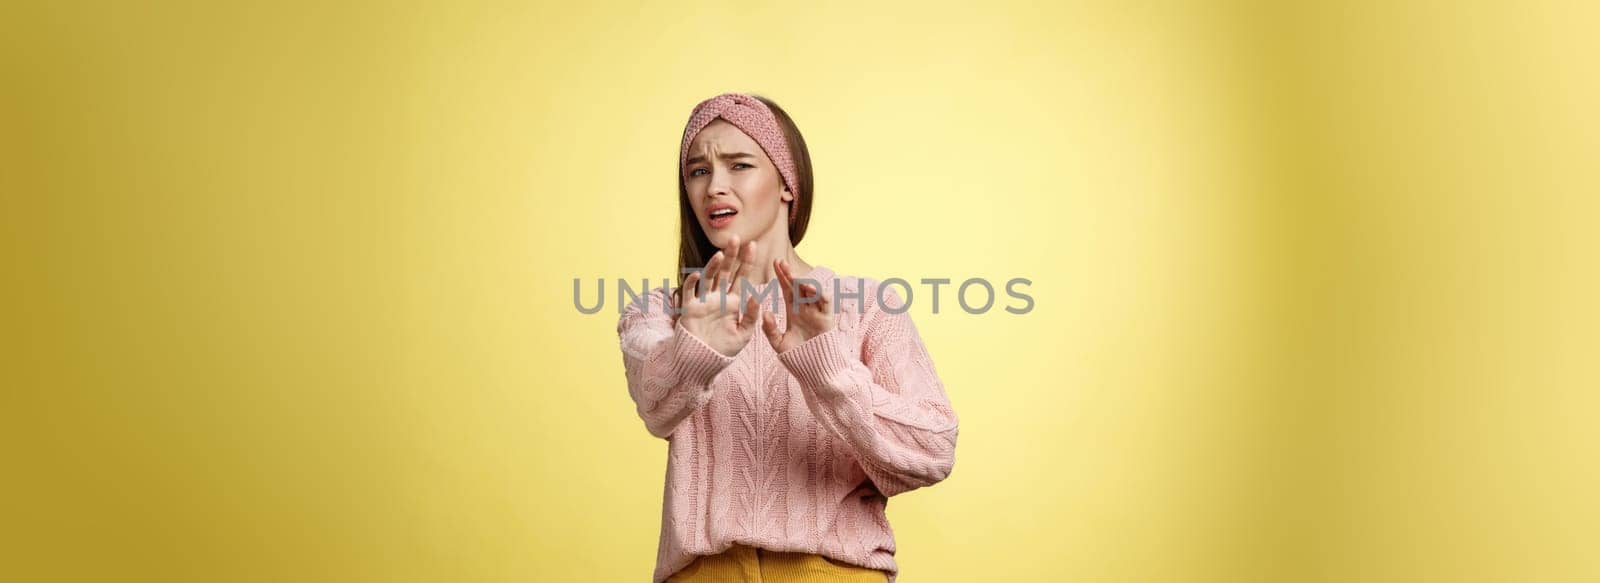 Omg no. Cute young european schoolgirl step back stooping grimacing disgusted and displeased turning away reluctant expressing aversion extending palm in rejection, refusal gesture over yellow wall.